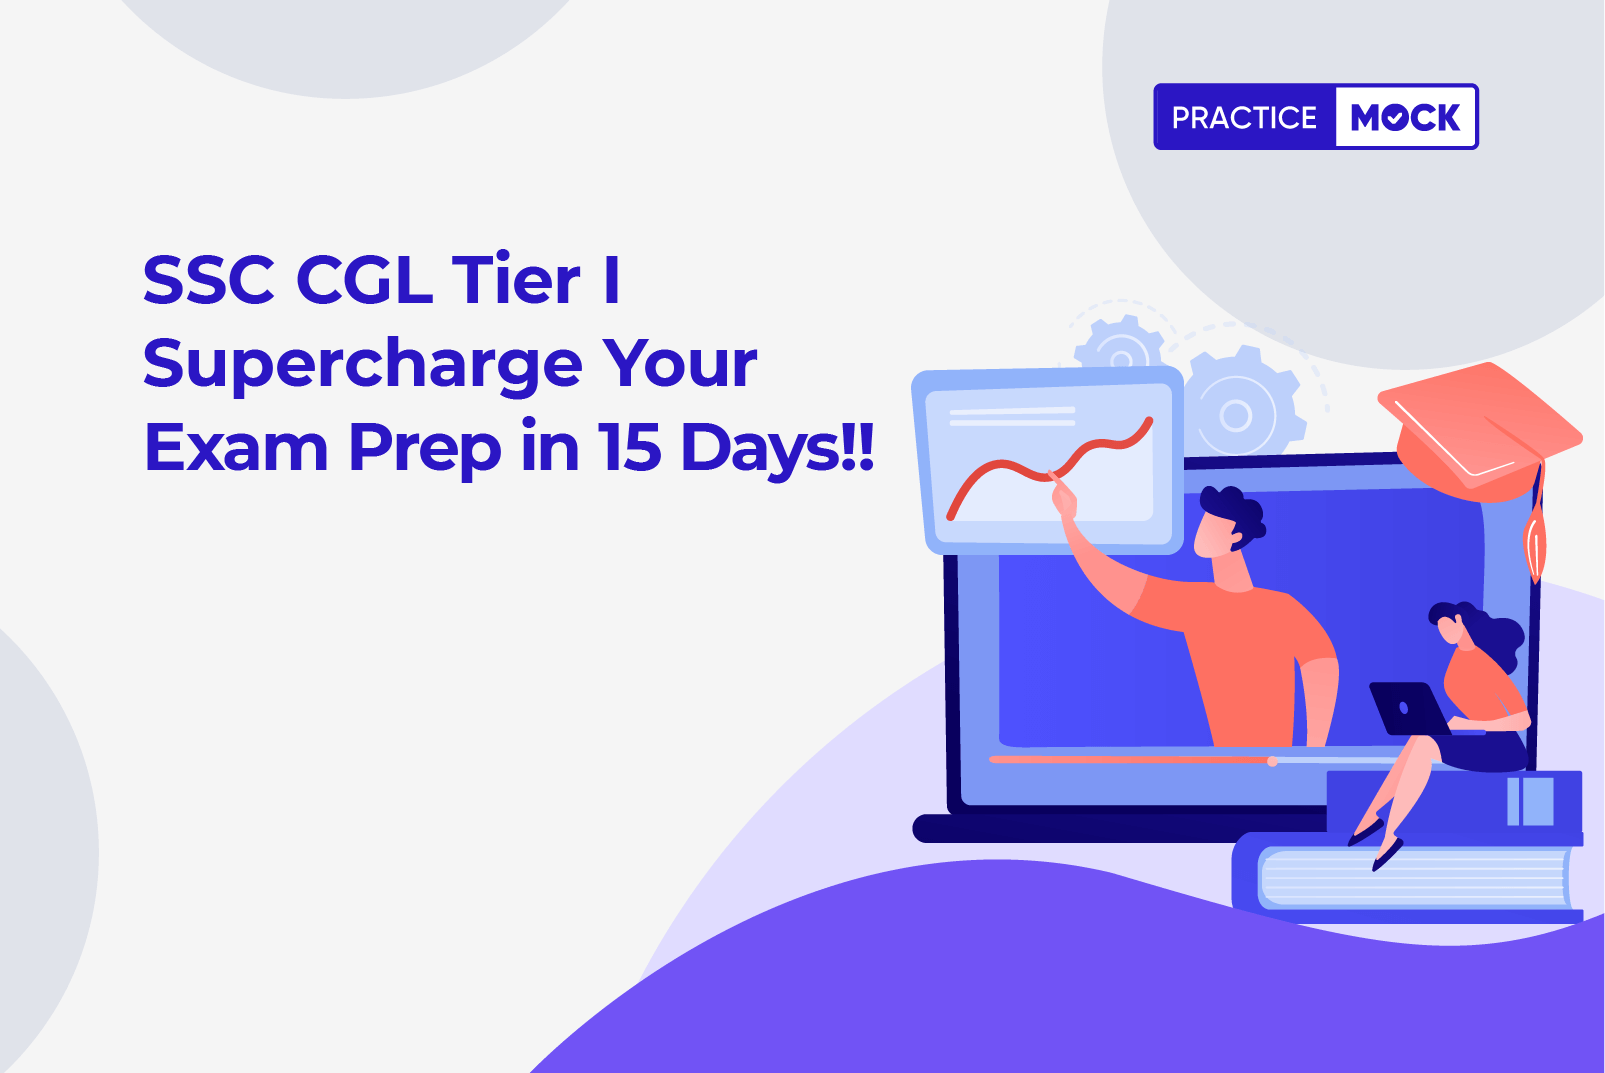 SSC CGL Tier I Supercharge Your Exam Prep in 15 Days!!